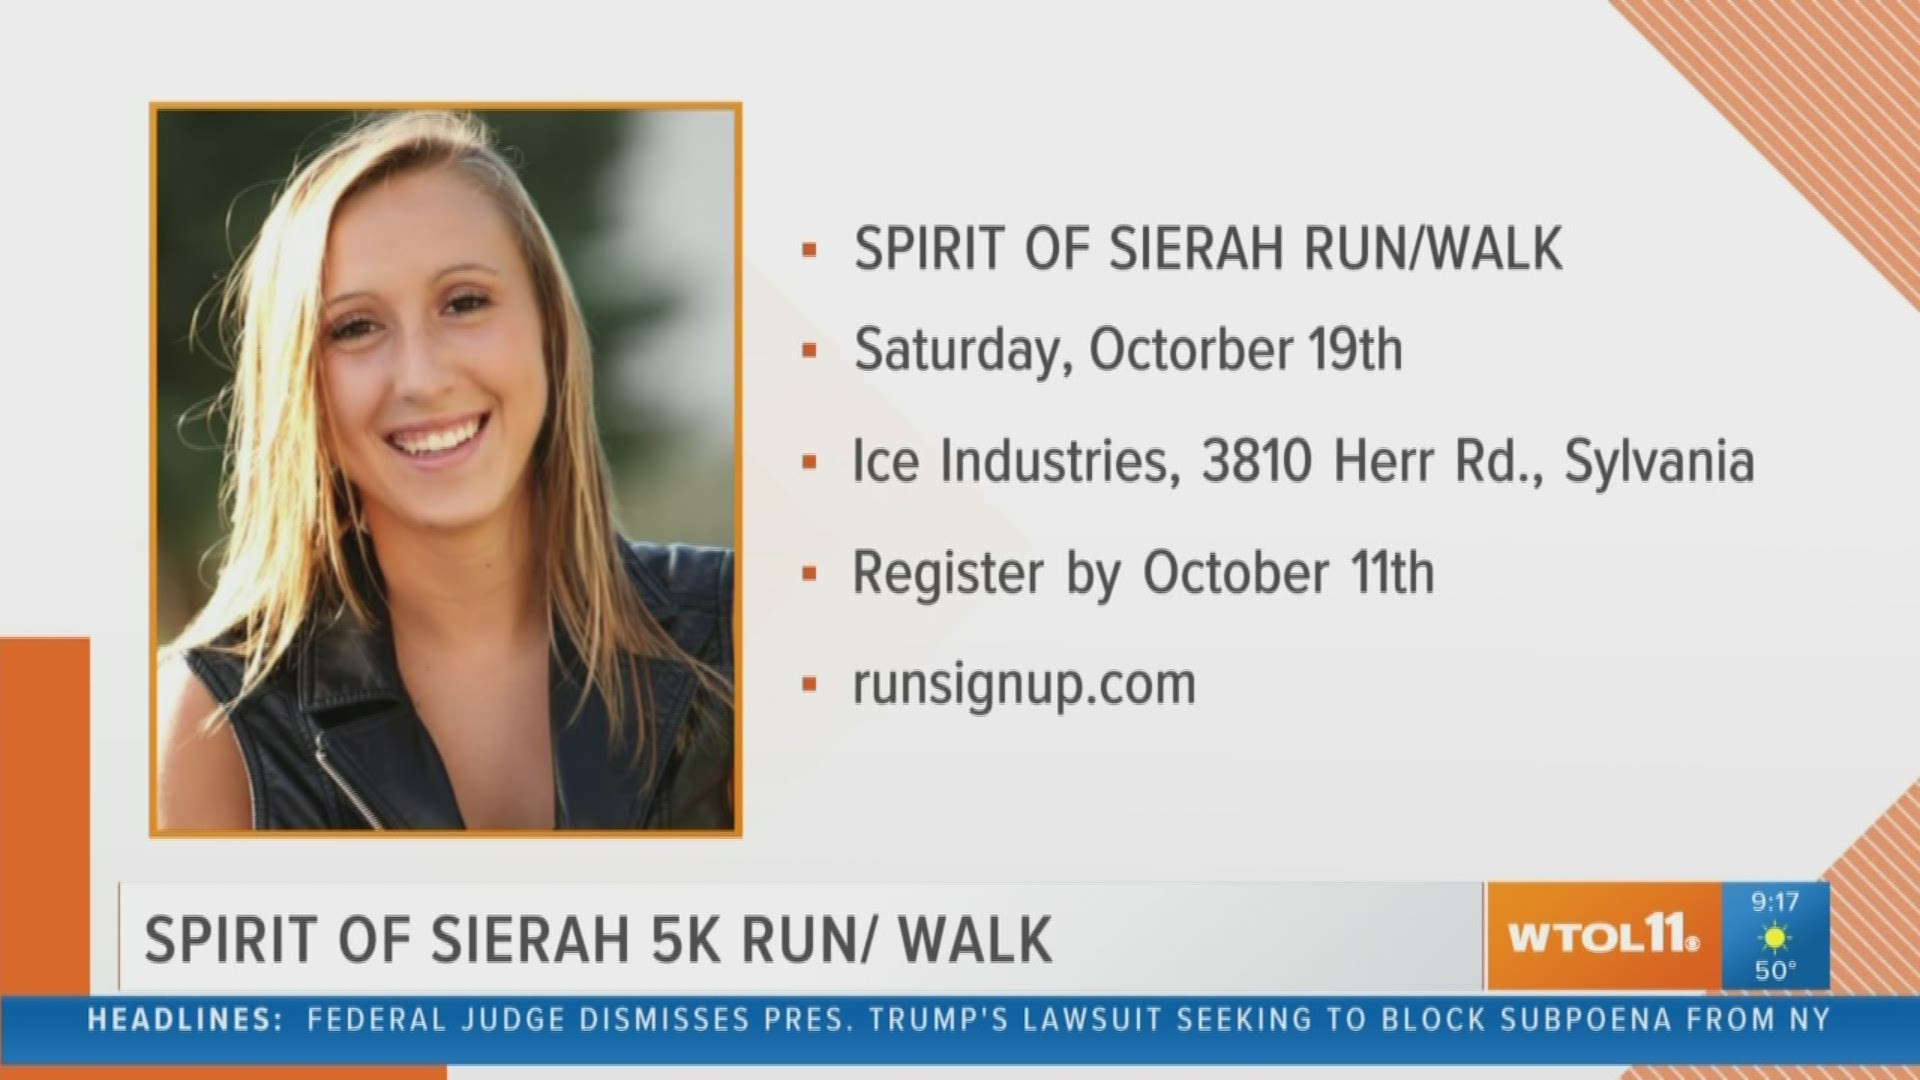 The 5K run/walk honors the life and legacy of Sierah Joughin. Participants should register by October 11 for the October 19 event.